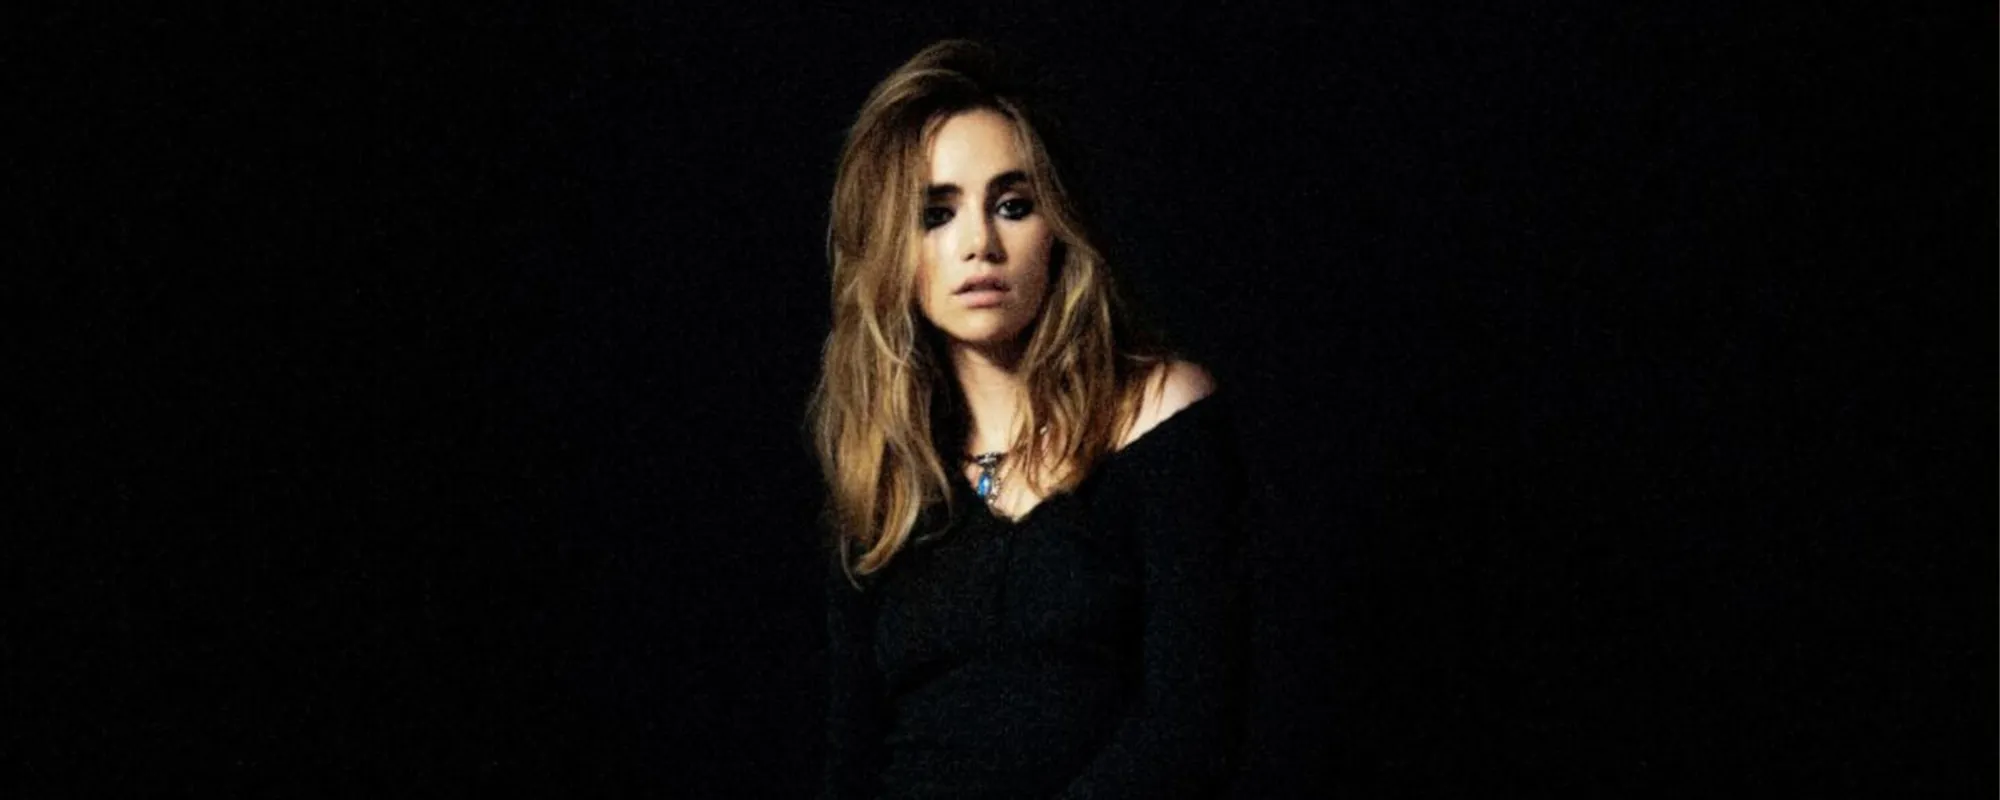 Suki Waterhouse Combines Taylor Swift and Mazzy Star in Medley Performance